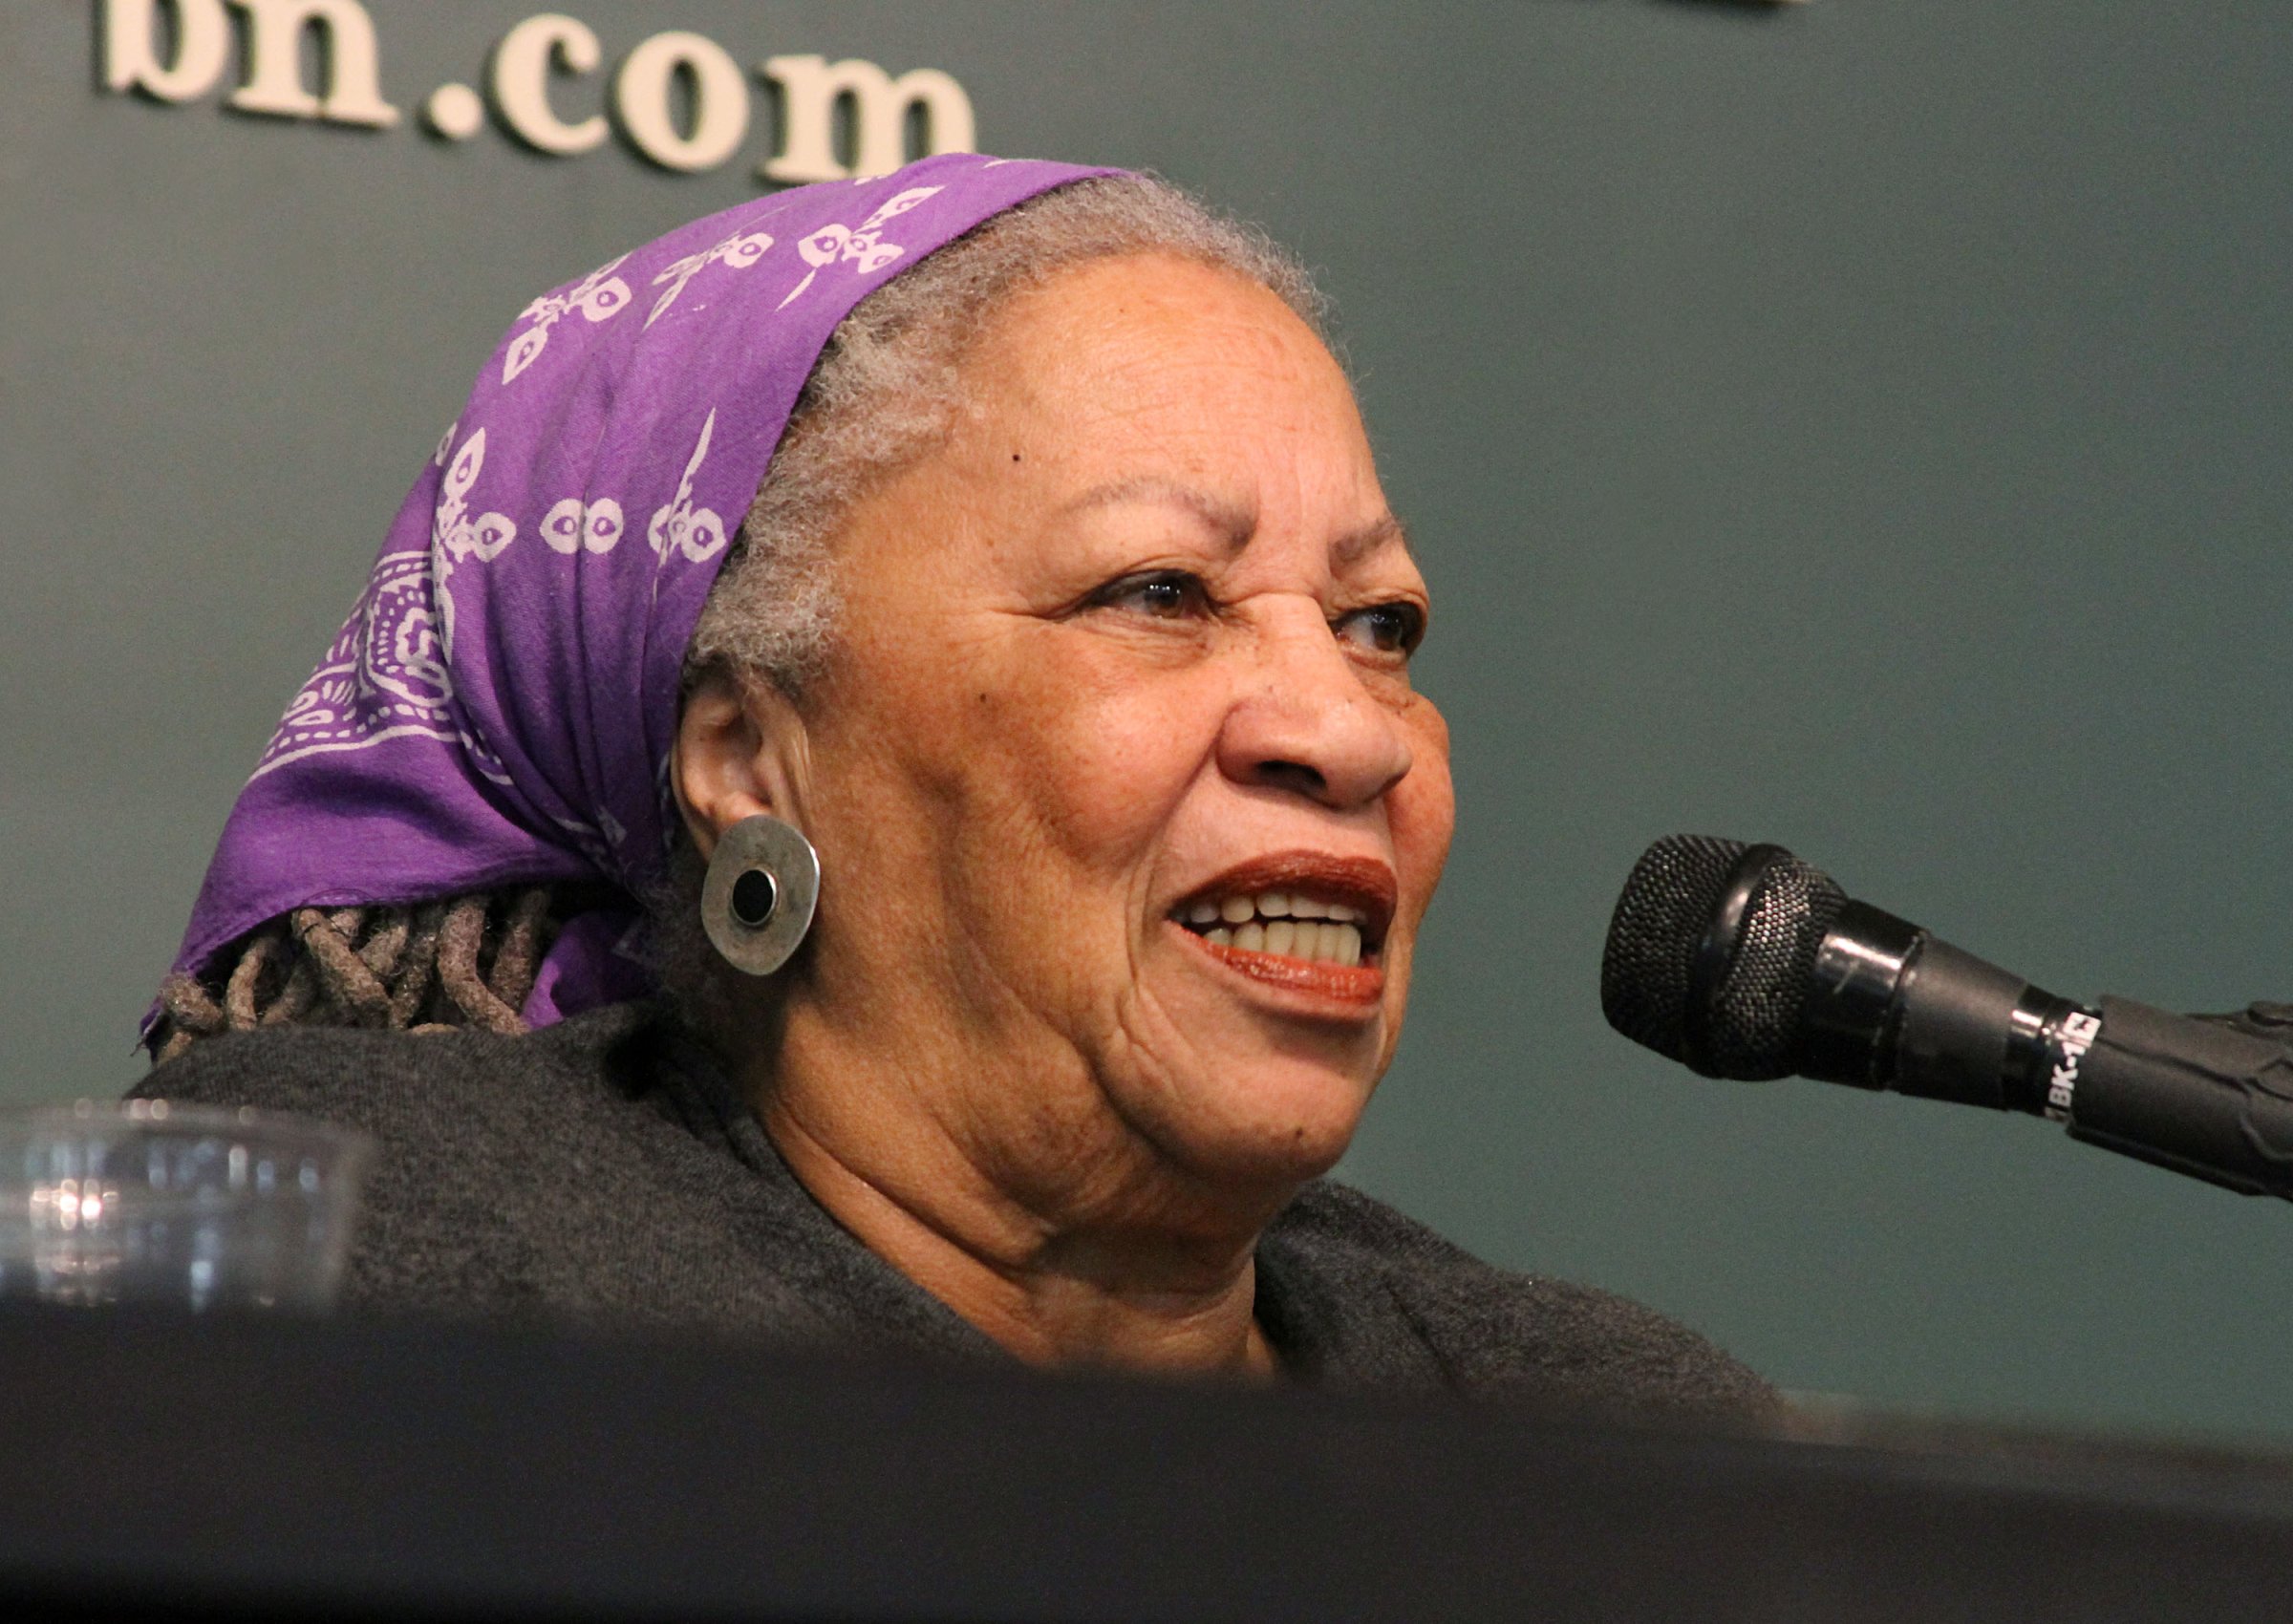 Toni Morrison promotes her new book "Home" at Barnes & Noble Union Square on May 14, 2012 in New York City.